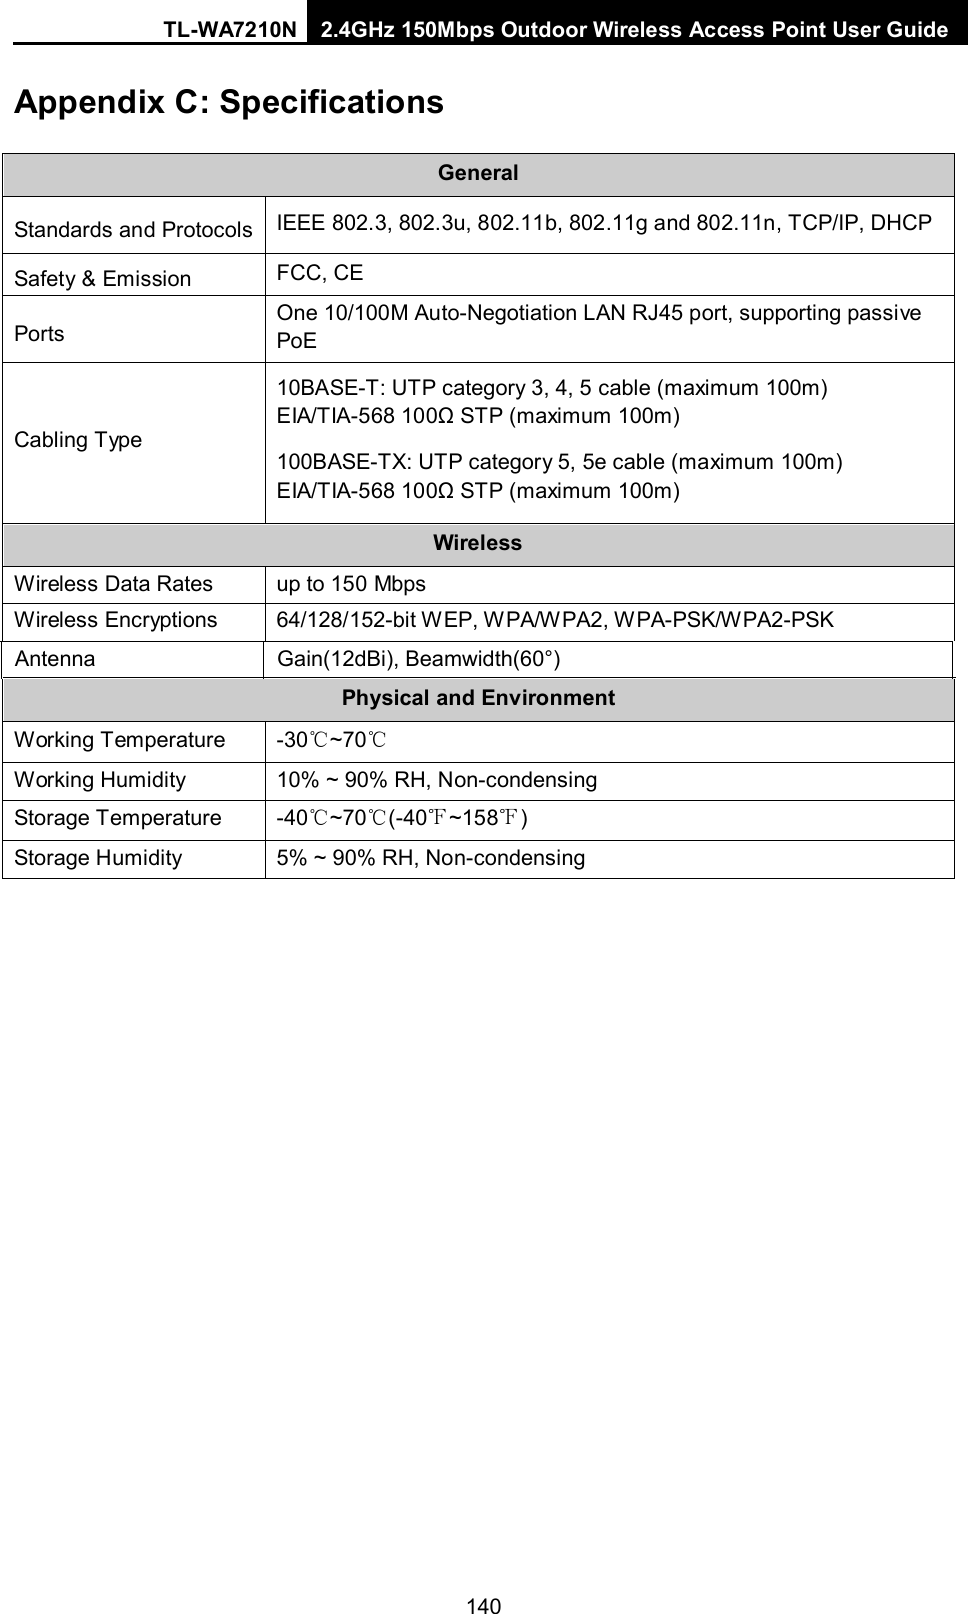 TL-WA7210N 2.4GHz 150Mbps Outdoor Wireless Access Point User Guide  140Appendix C: Specifications General Standards and Protocols IEEE 802.3, 802.3u, 802.11b, 802.11g and 802.11n, TCP/IP, DHCP Safety &amp; Emission FCC, CE Ports One 10/100M Auto-Negotiation LAN RJ45 port, supporting passive PoE Cabling Type 10BASE-T: UTP category 3, 4, 5 cable (maximum 100m) EIA/TIA-568 100Ω STP (maximum 100m) 100BASE-TX: UTP category 5, 5e cable (maximum 100m) EIA/TIA-568 100Ω STP (maximum 100m) Wireless Wireless Data Rates up to 150 Mbps Physical and Environment Working Temperature -30℃~70℃ Working Humidity 10% ~ 90% RH, Non-condensing Storage Temperature  -40℃~70℃(-40℉~158℉) Storage Humidity  5% ~ 90% RH, Non-condensing Wireless Encryptions 64/128/152-bit WEP, WPA/WPA2, W PA-PSK/WPA2-PSK Antenna                              Gain(12dBi), Beamwidth(60°) 